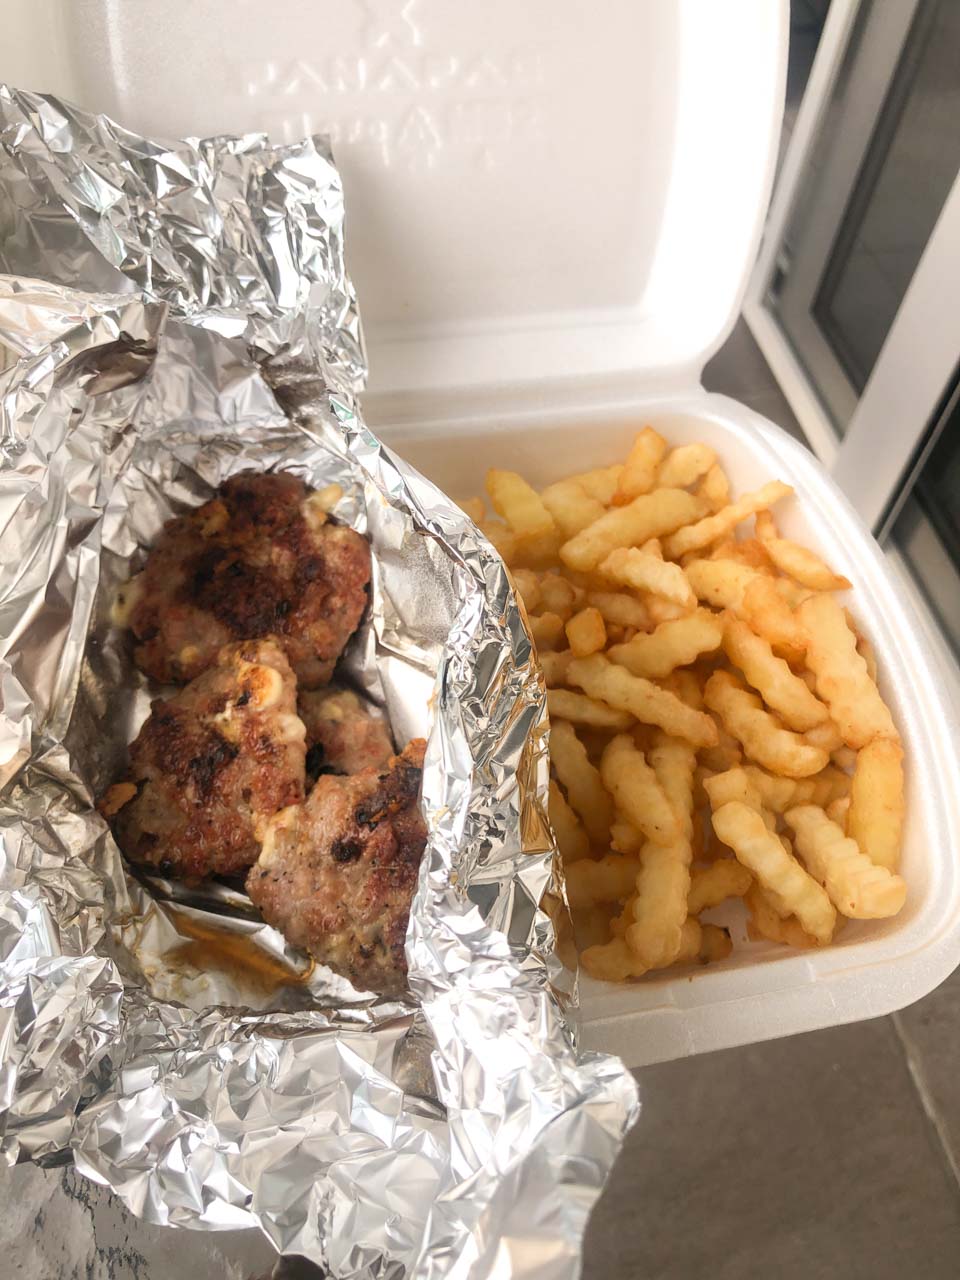 Meat and chips in a takeaway container